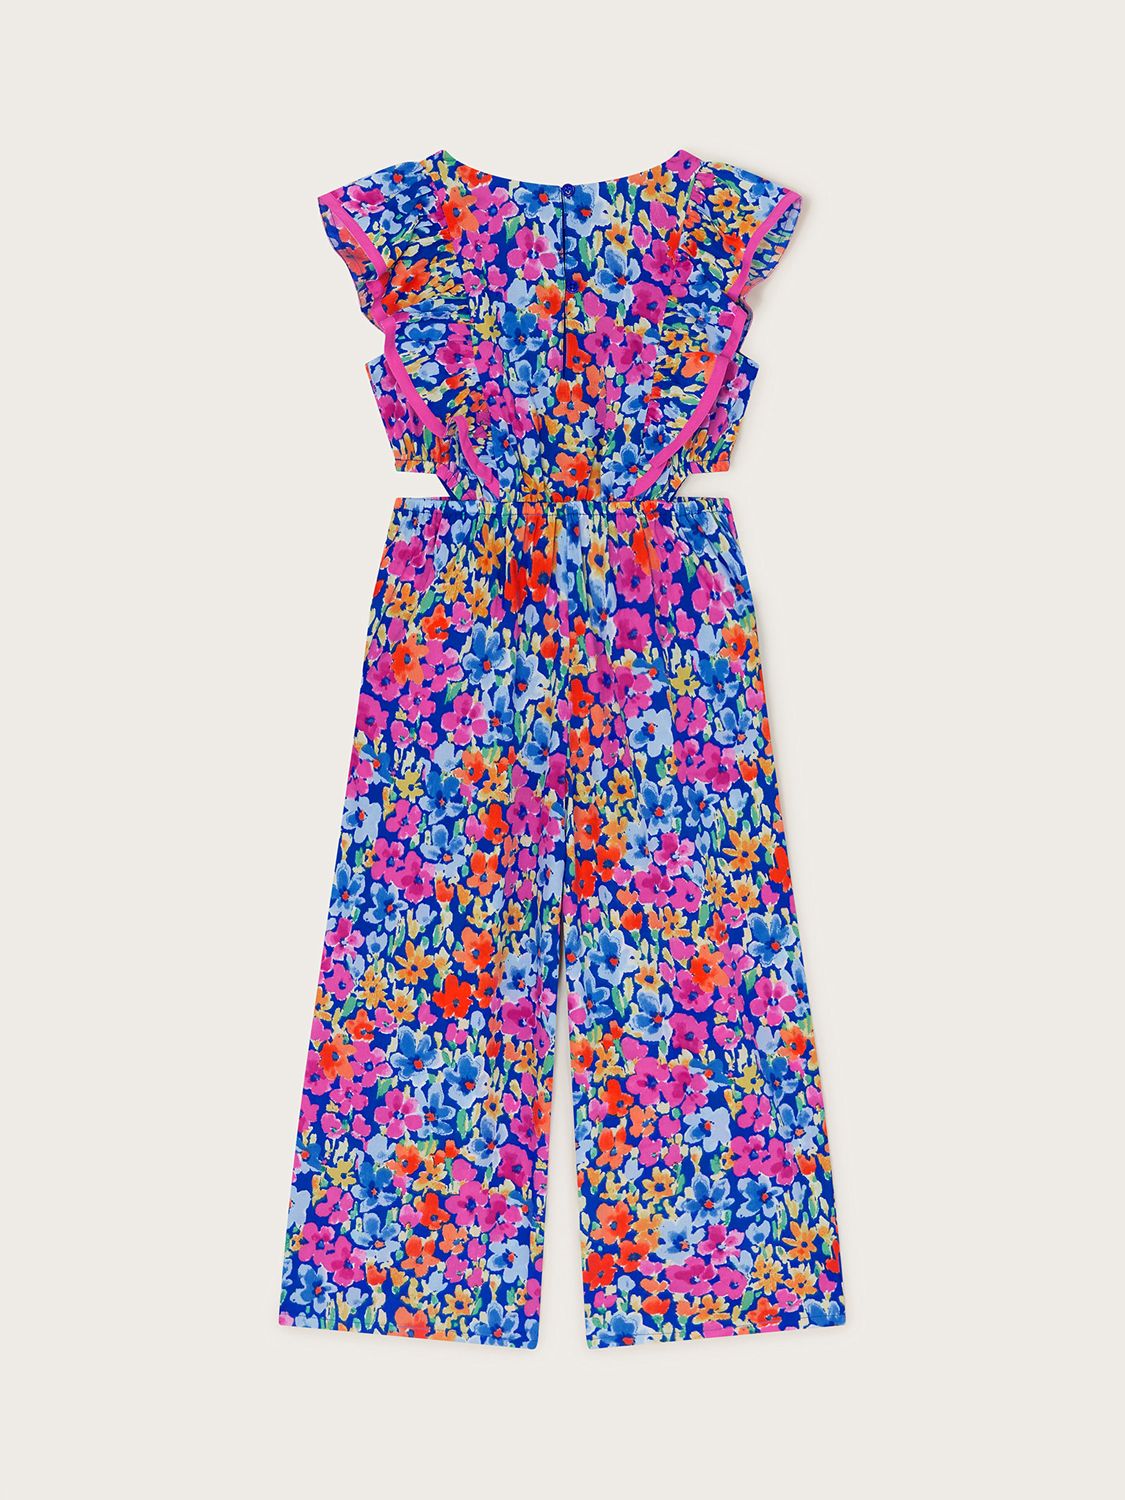 Monsoon Kids' Bright Floral Cut Out Jumpsuit, Blue, 14-15 years